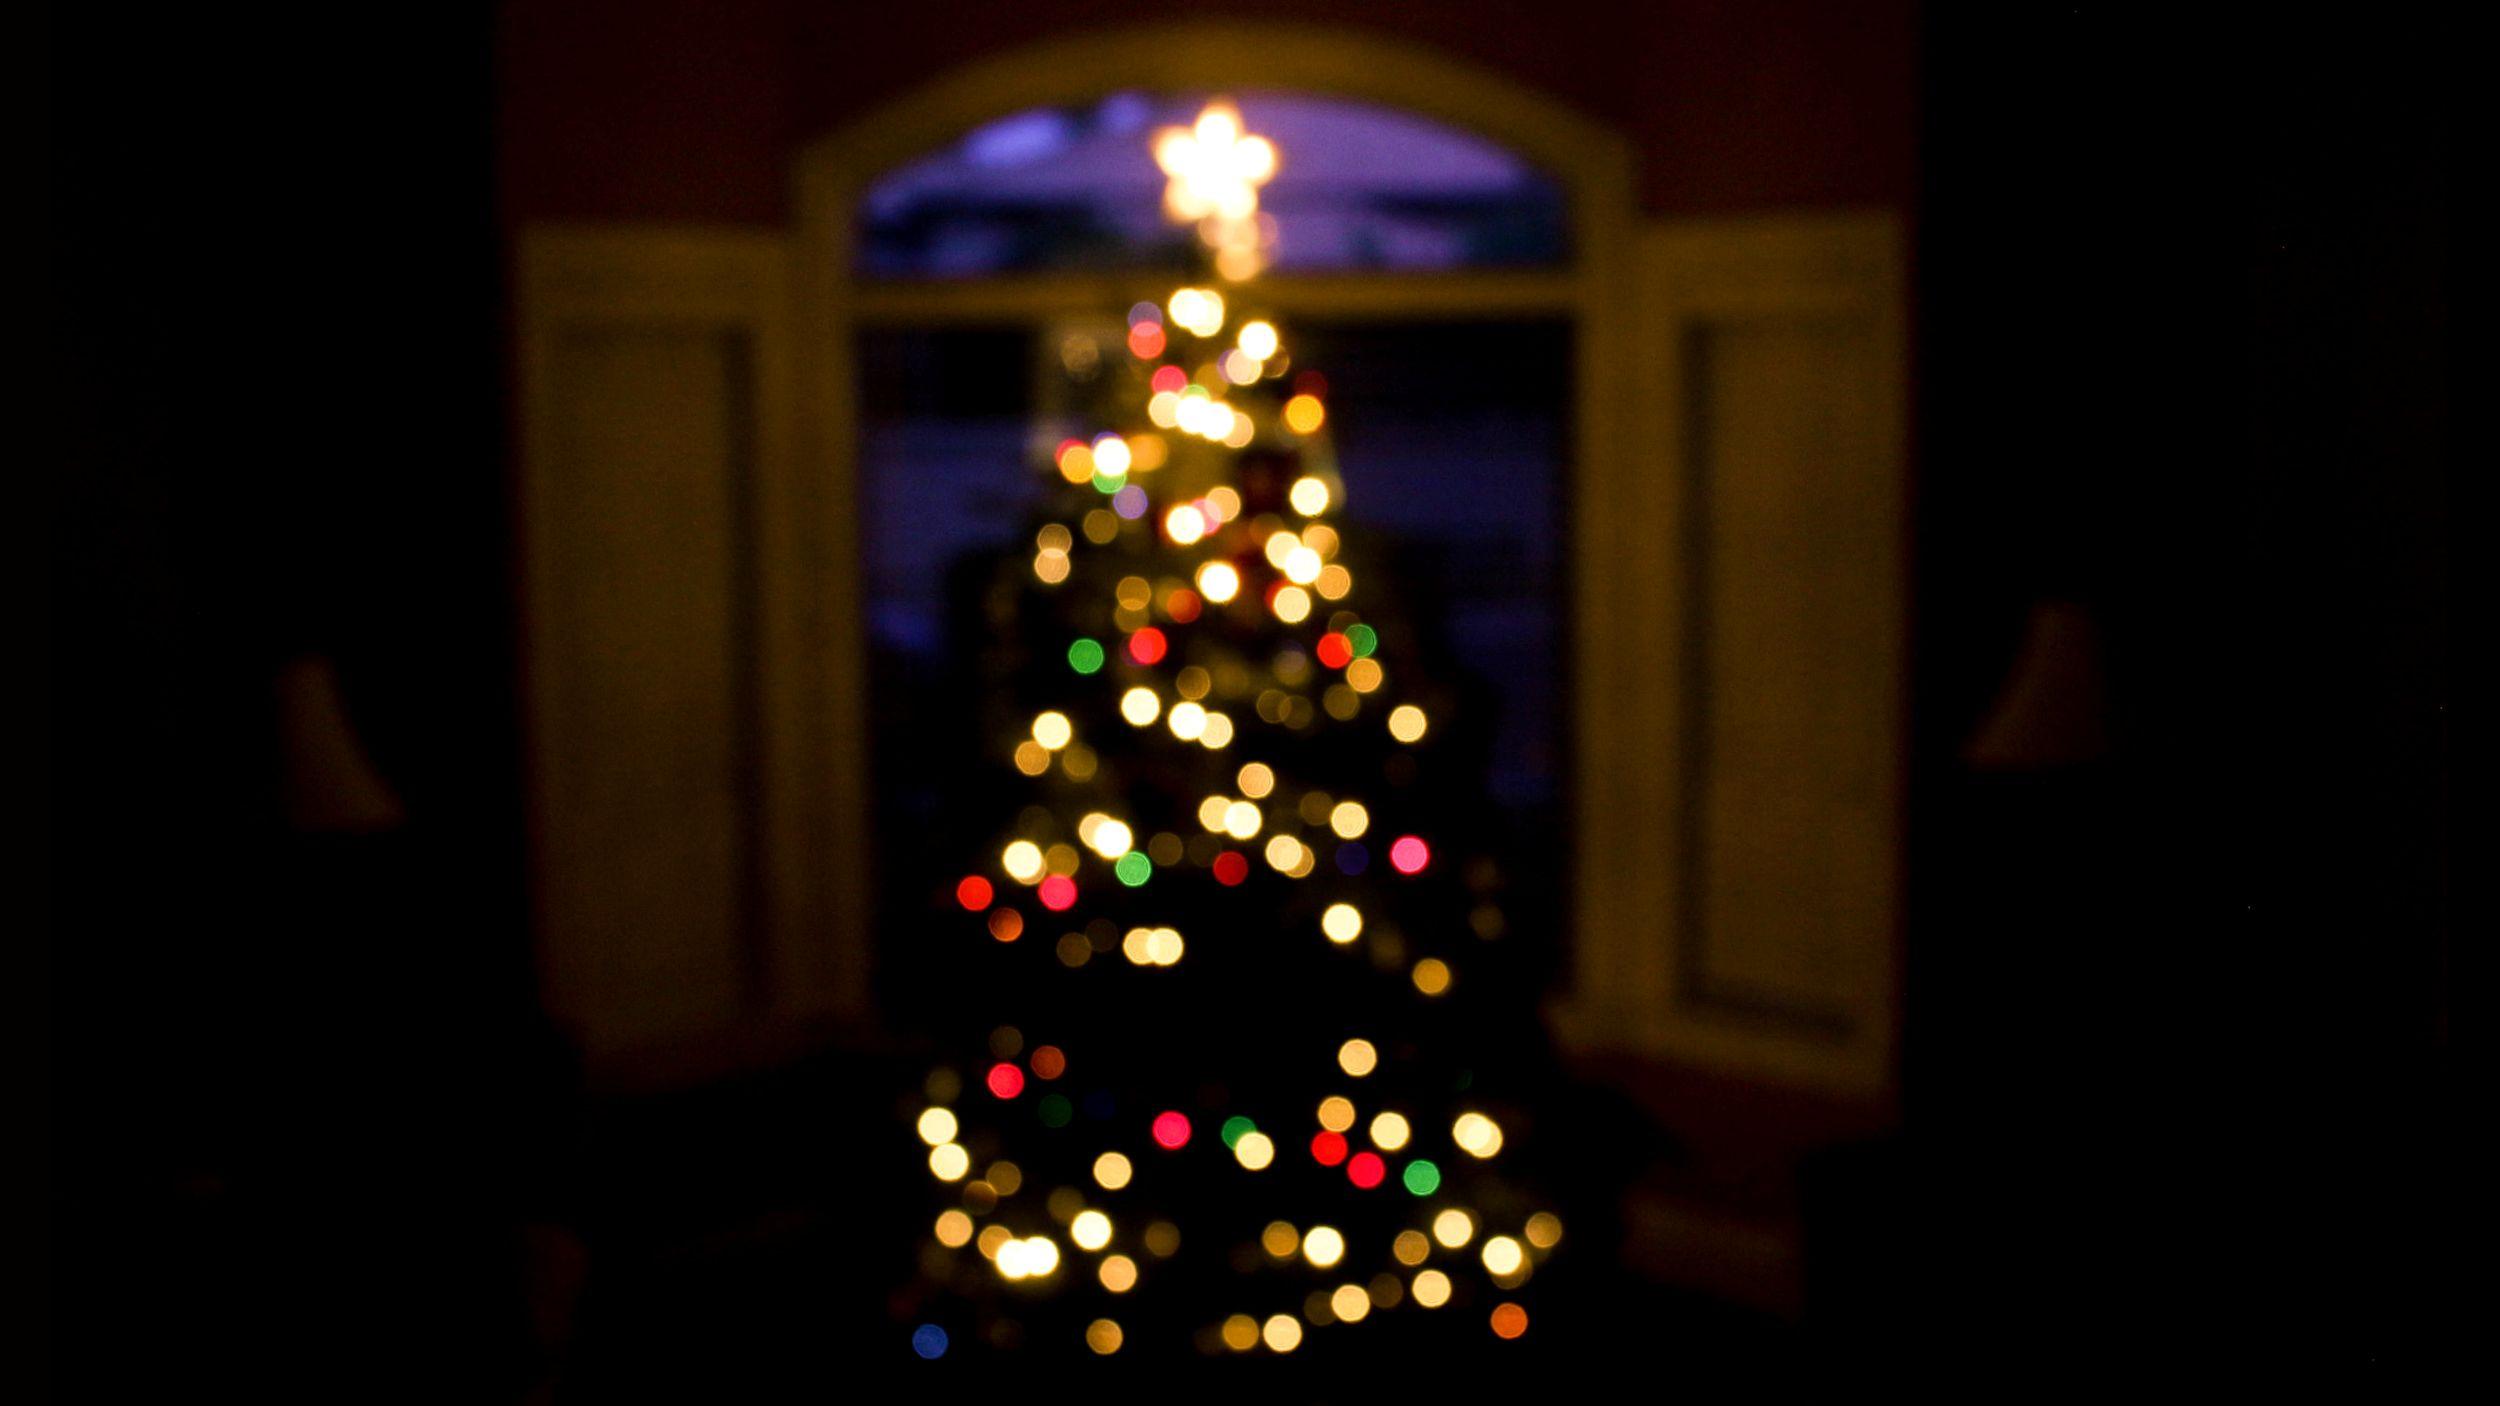 Christmas tree out of focus blurred